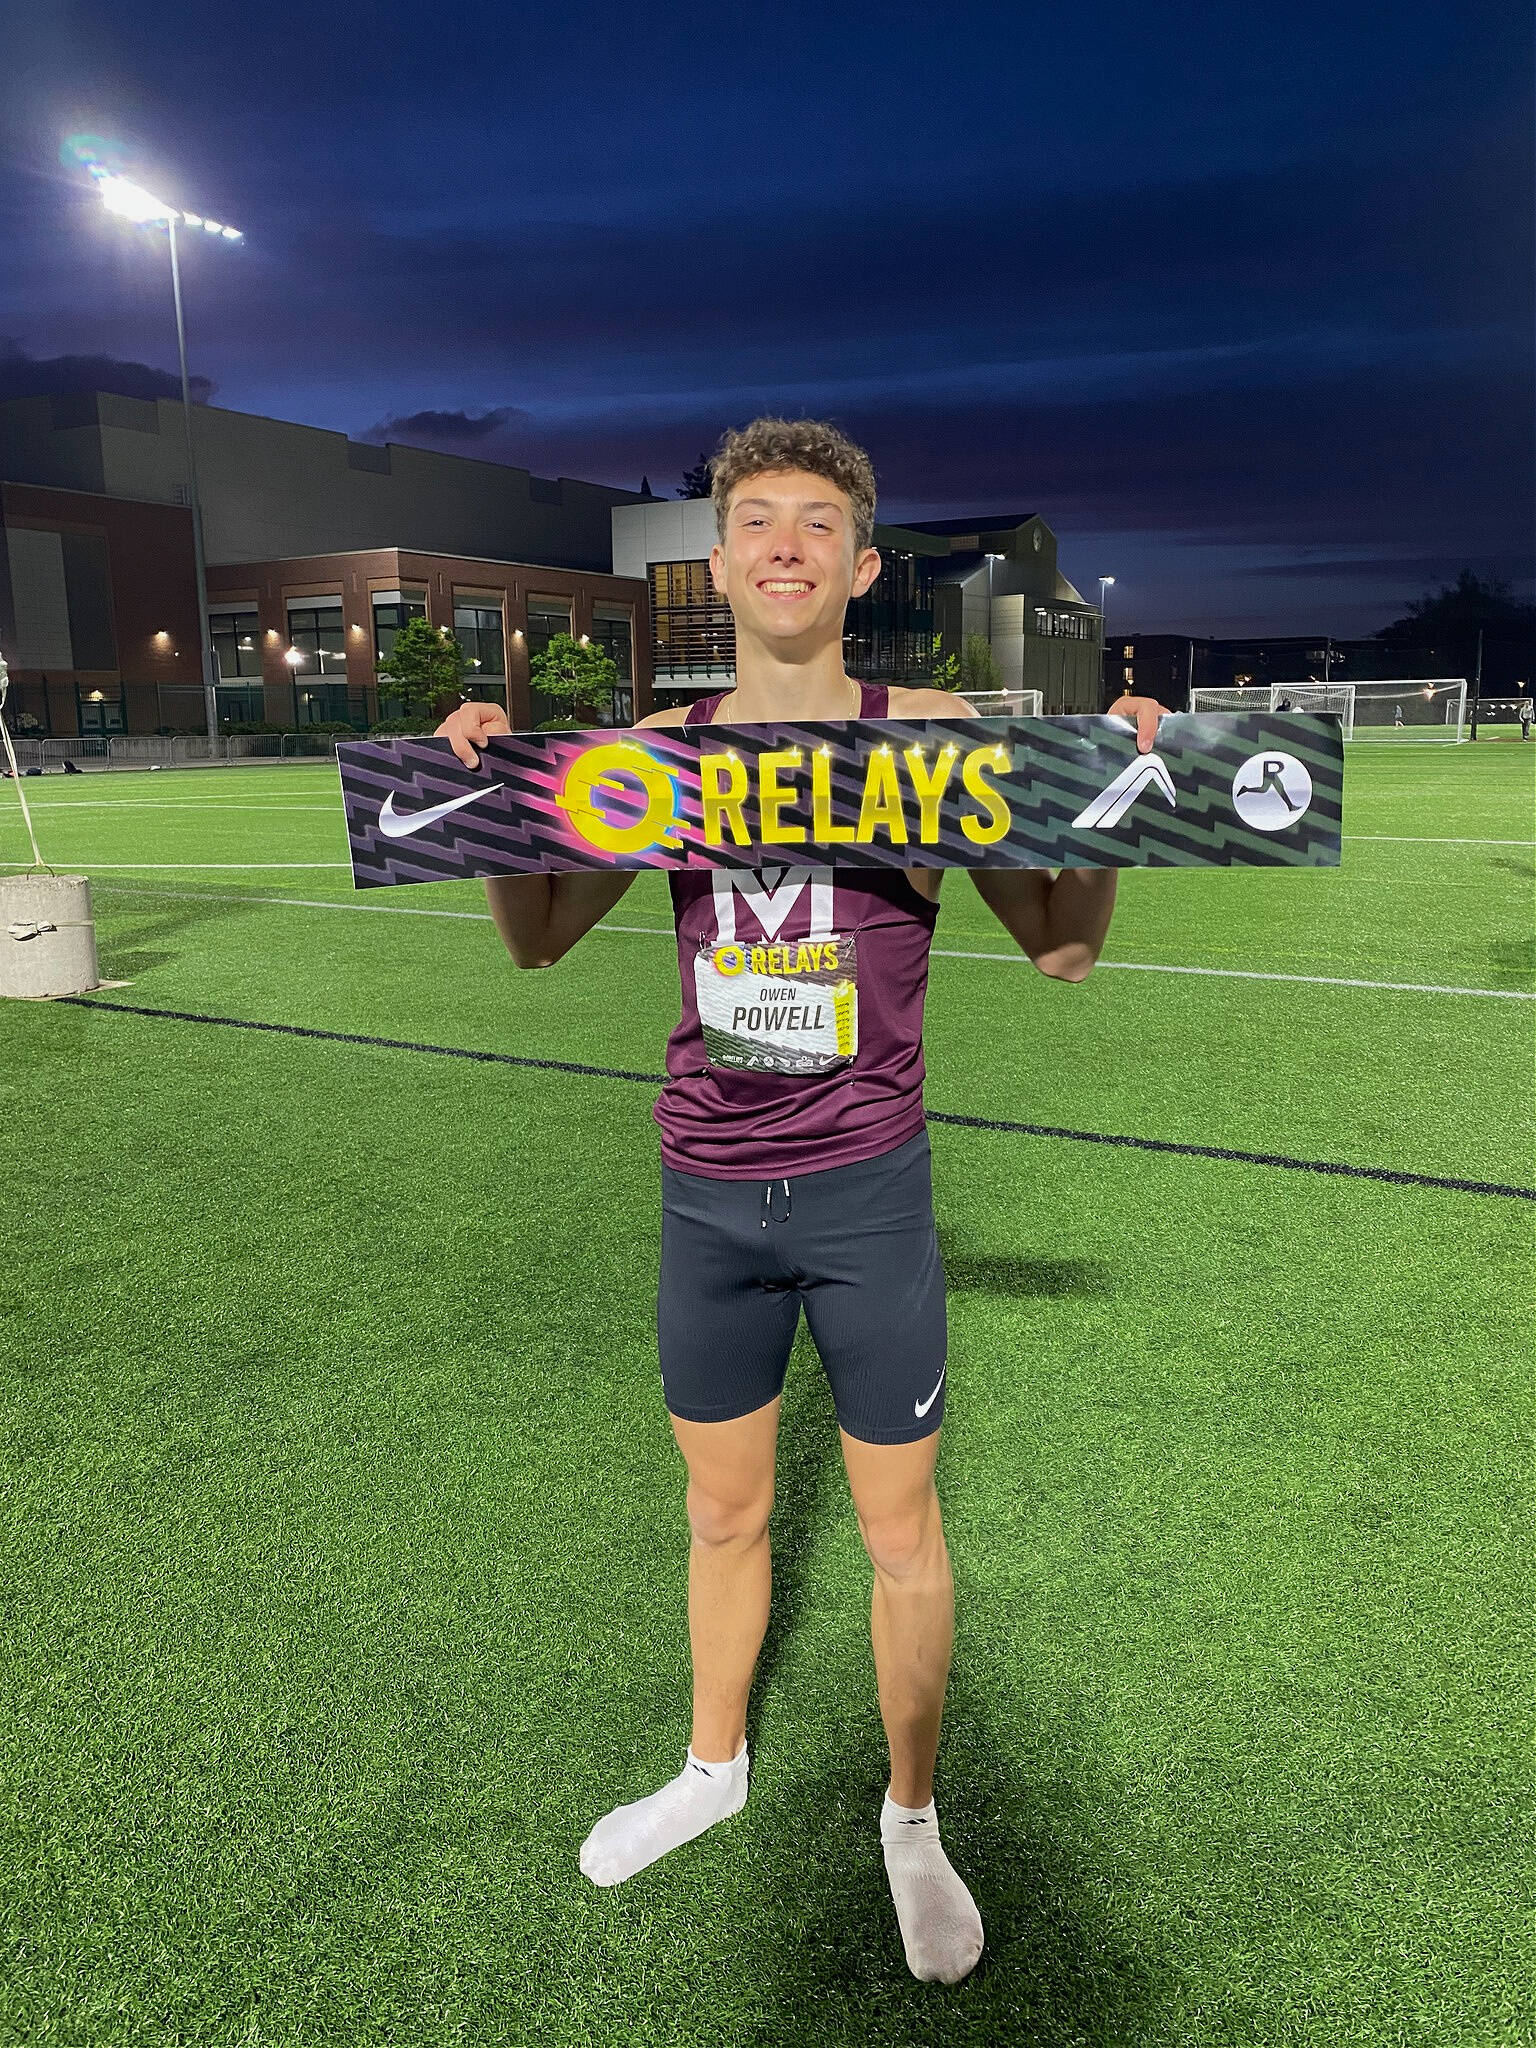 Mercer Island High School junior Owen Powell broke a 21-year-old national high school record in the 1,000-meter race on April 20 at the Oregon Relays. Powell notched a time of 2:23.22 —breaking Bobby Curtis’ mark of 2:24.79 in 2003 — at University of Oregon’s Hayward Field in Eugene. Photo courtesy of the Mercer Island School District